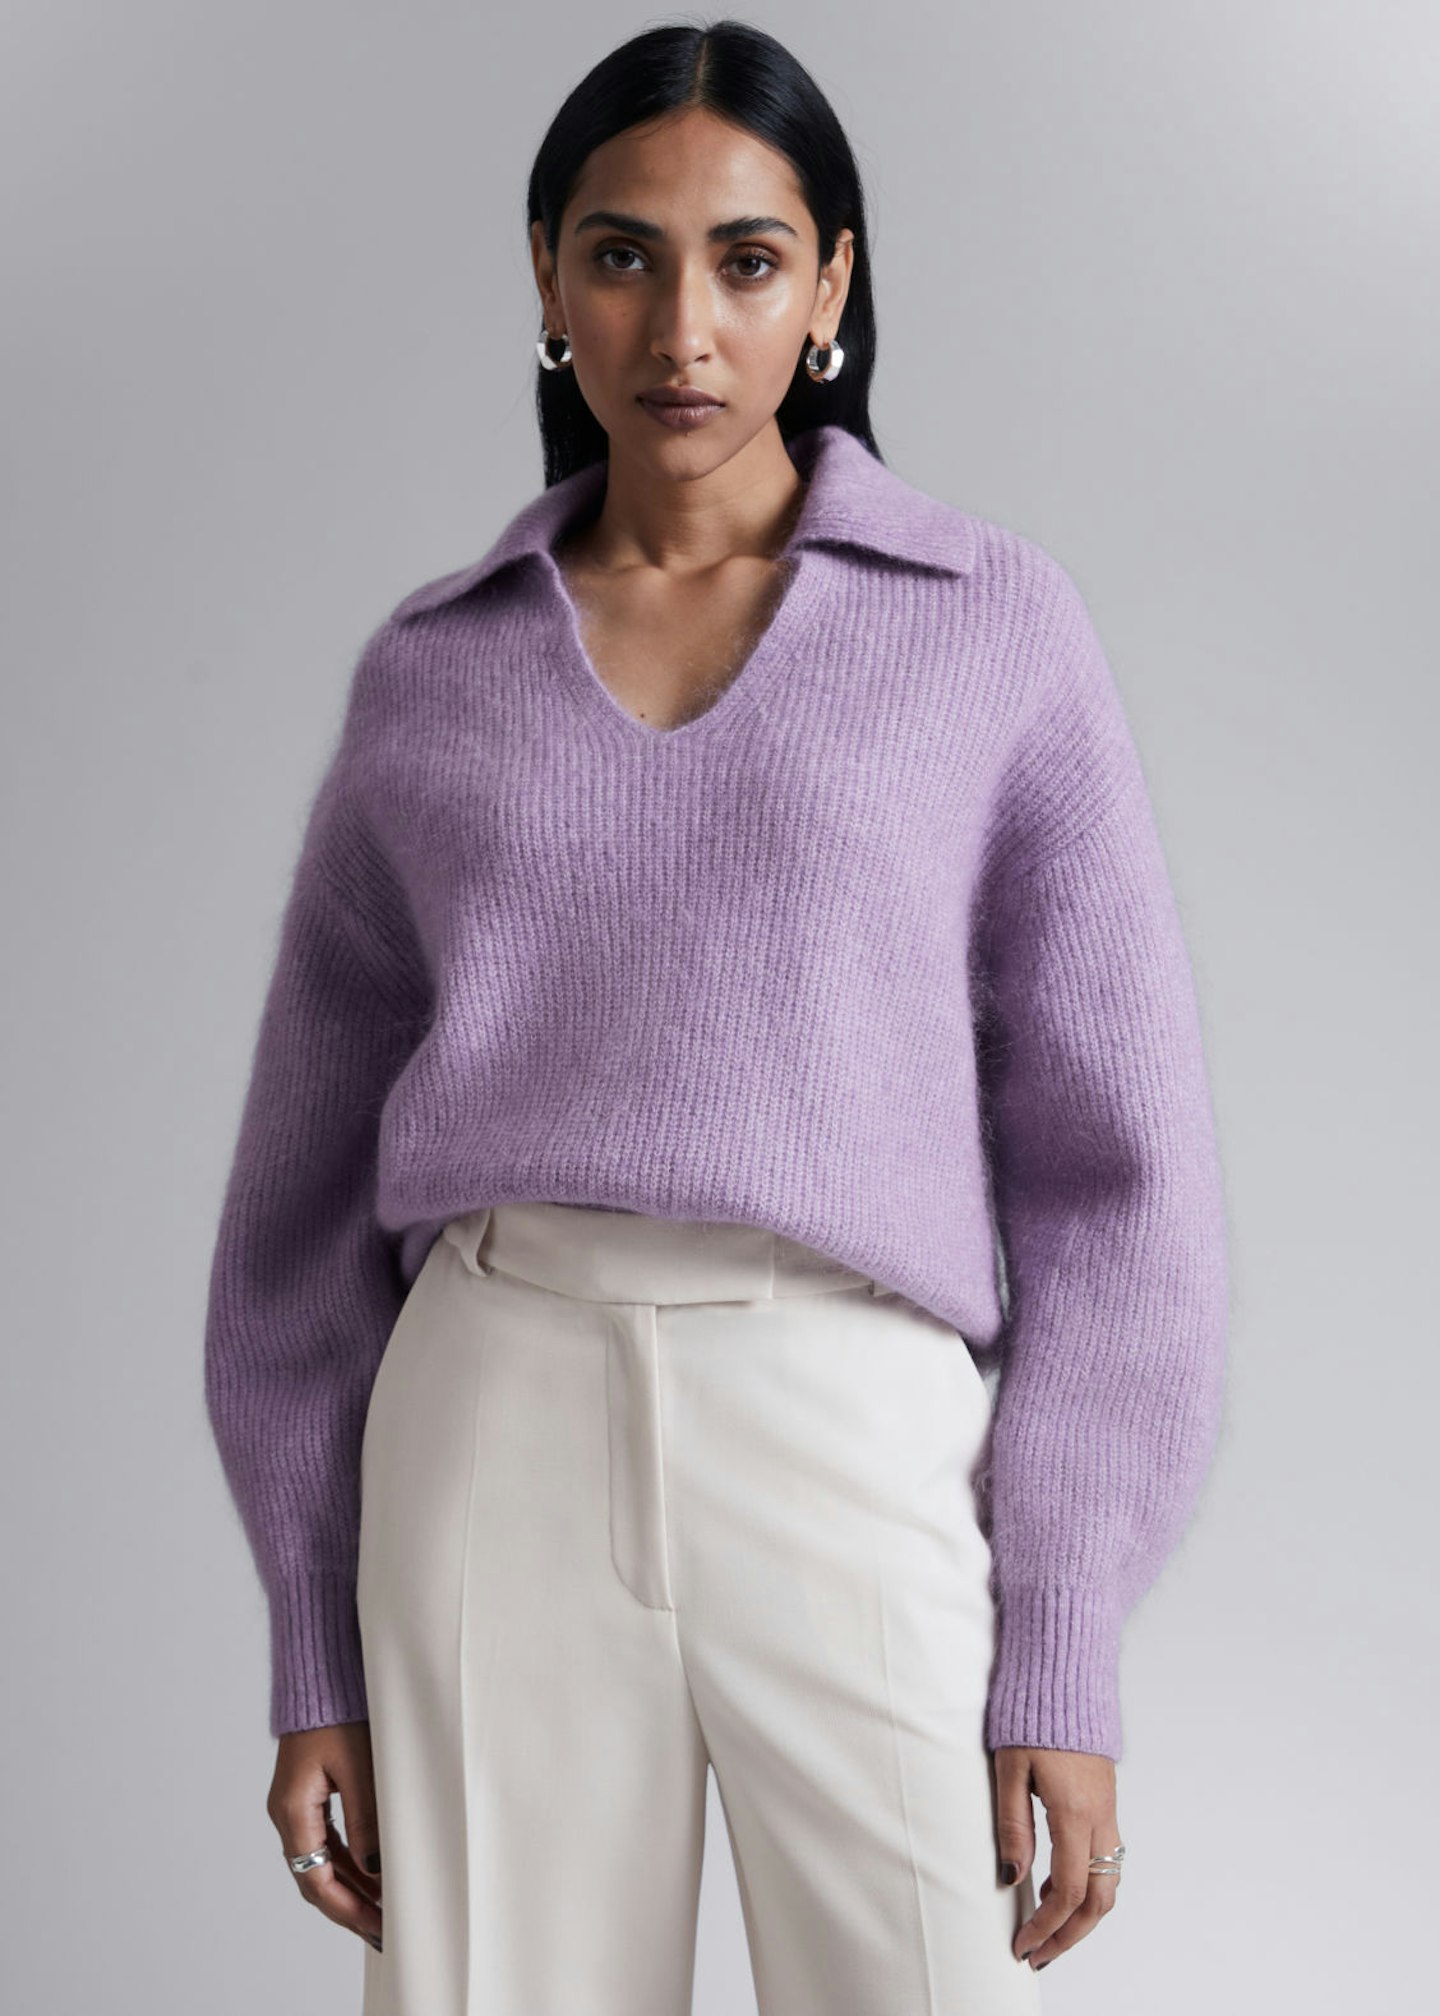 & Other Stories Relaxed Collared Sweater 